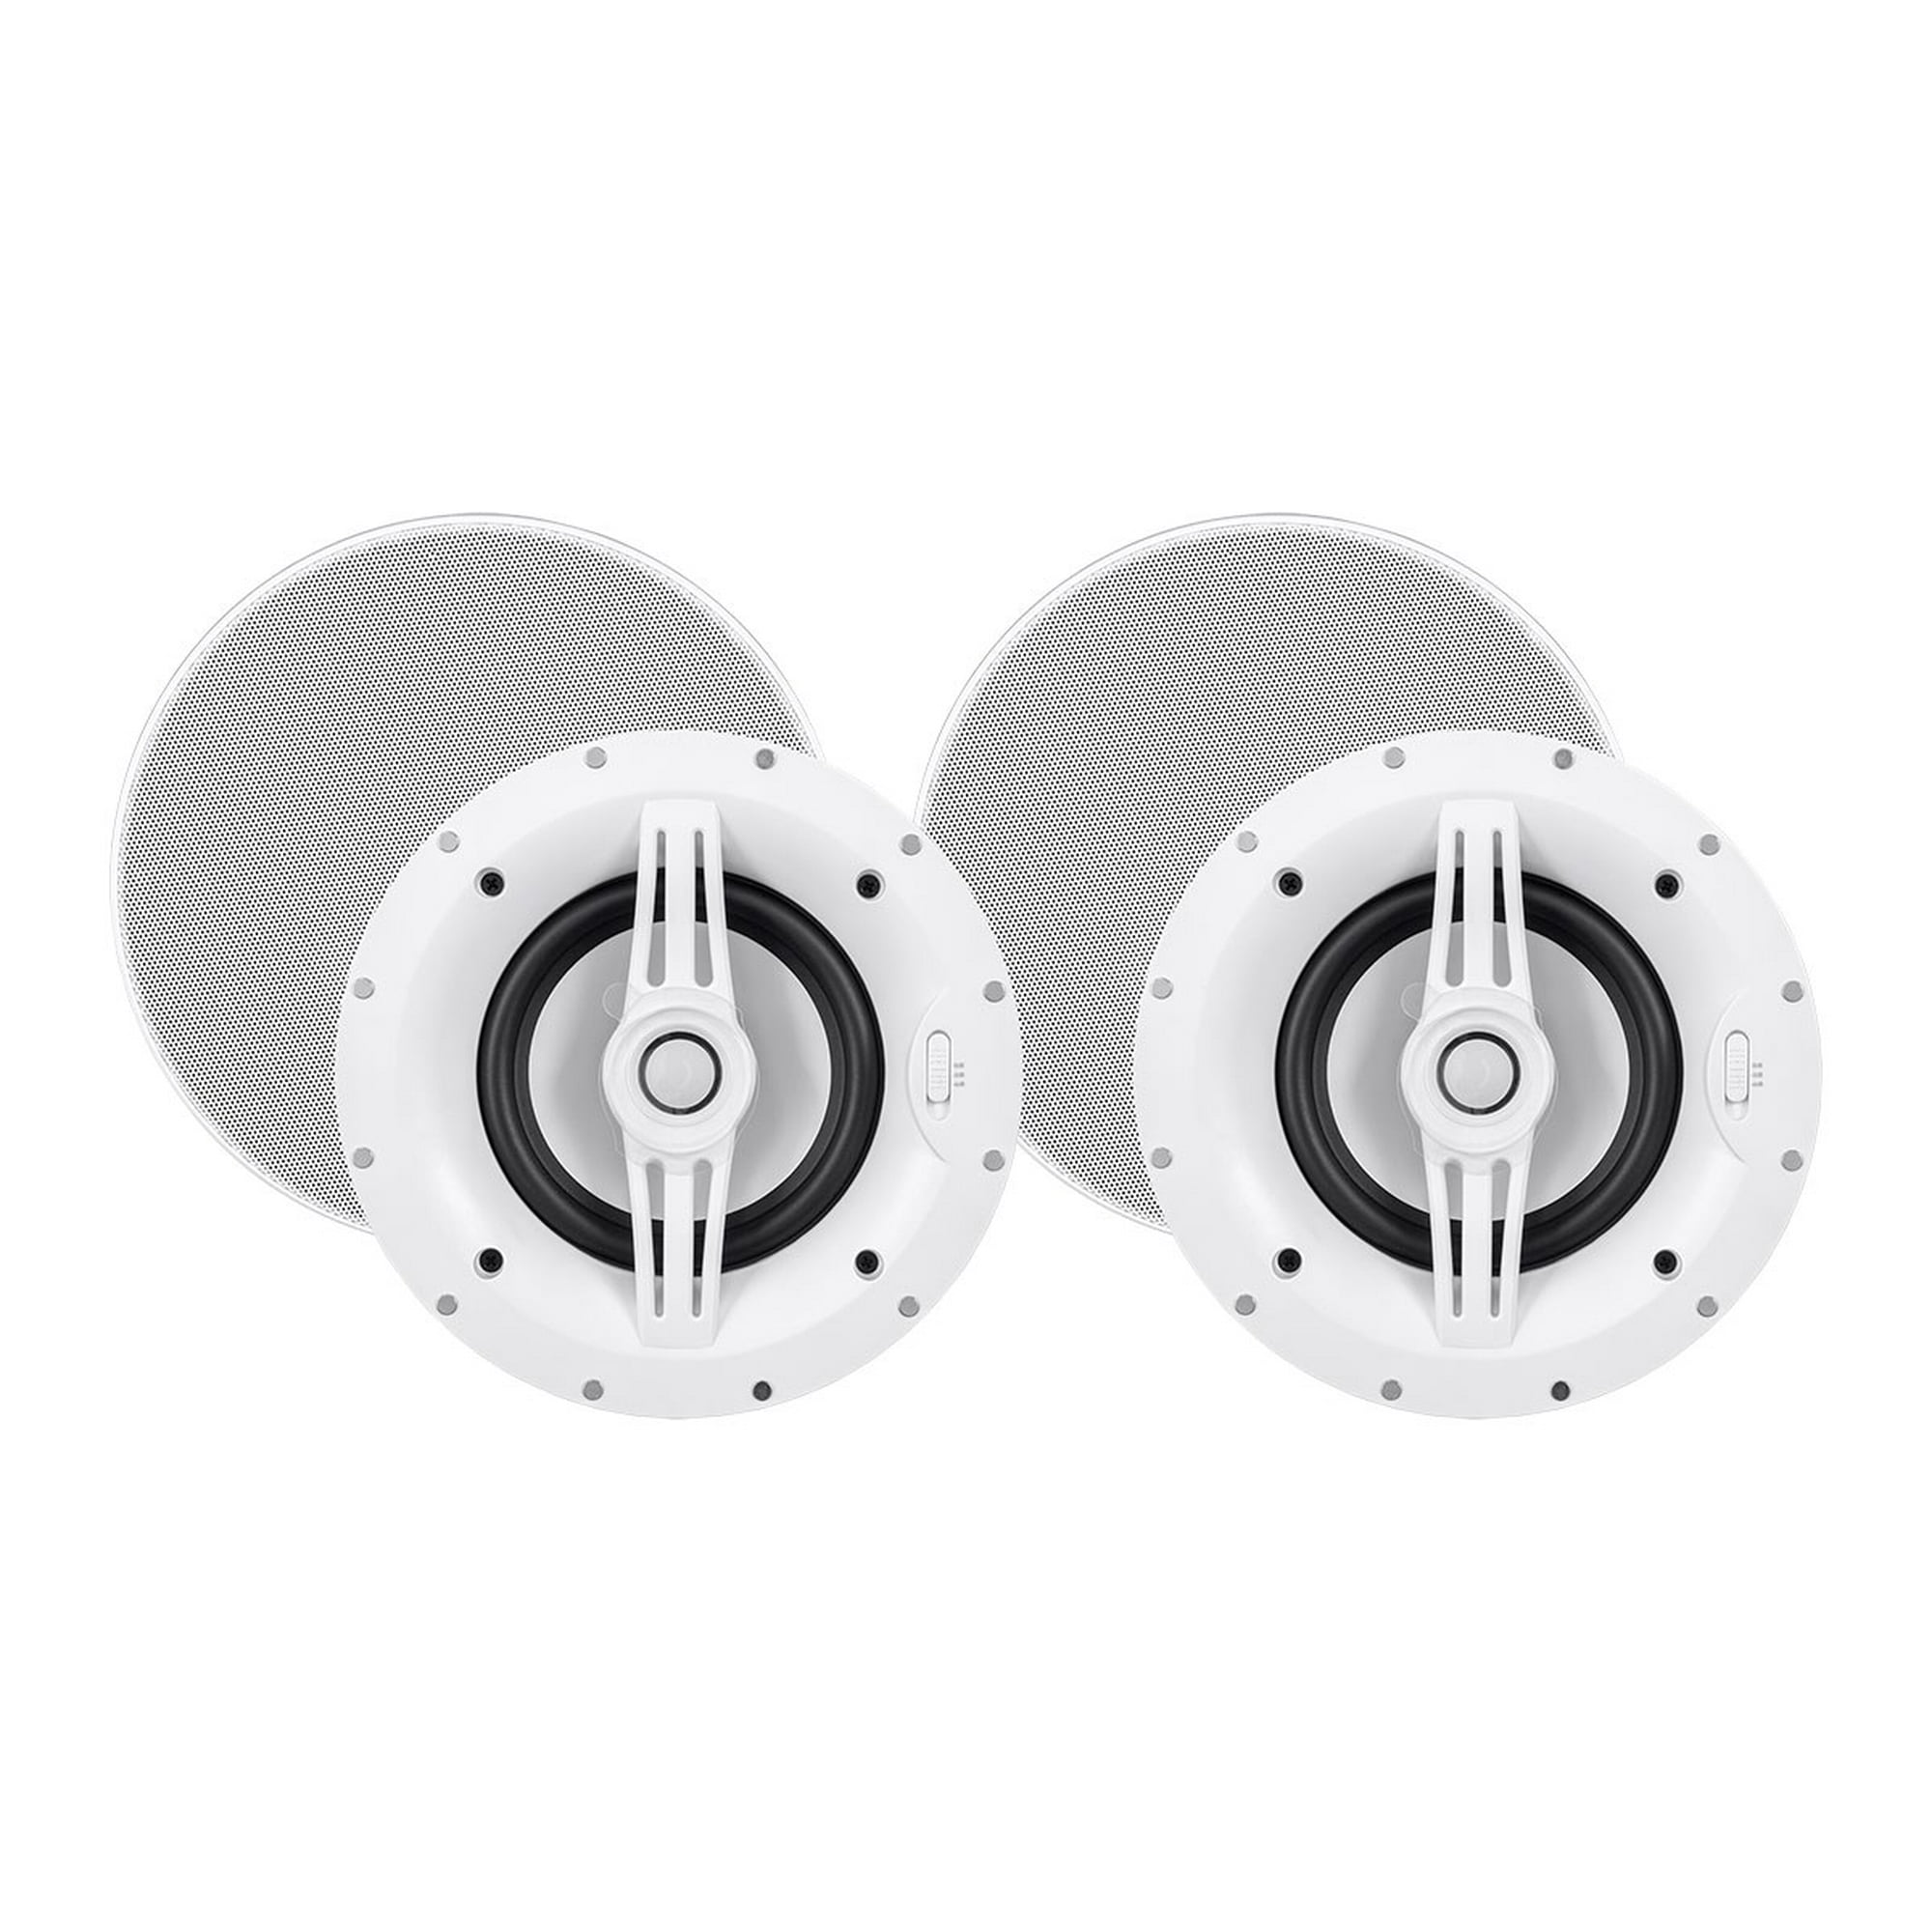 Sycamore By Monoprice Architectural Ceiling Speakers 6 5in 2 Way Aluminum With Micro Ceramic Composite Tweeter Pair